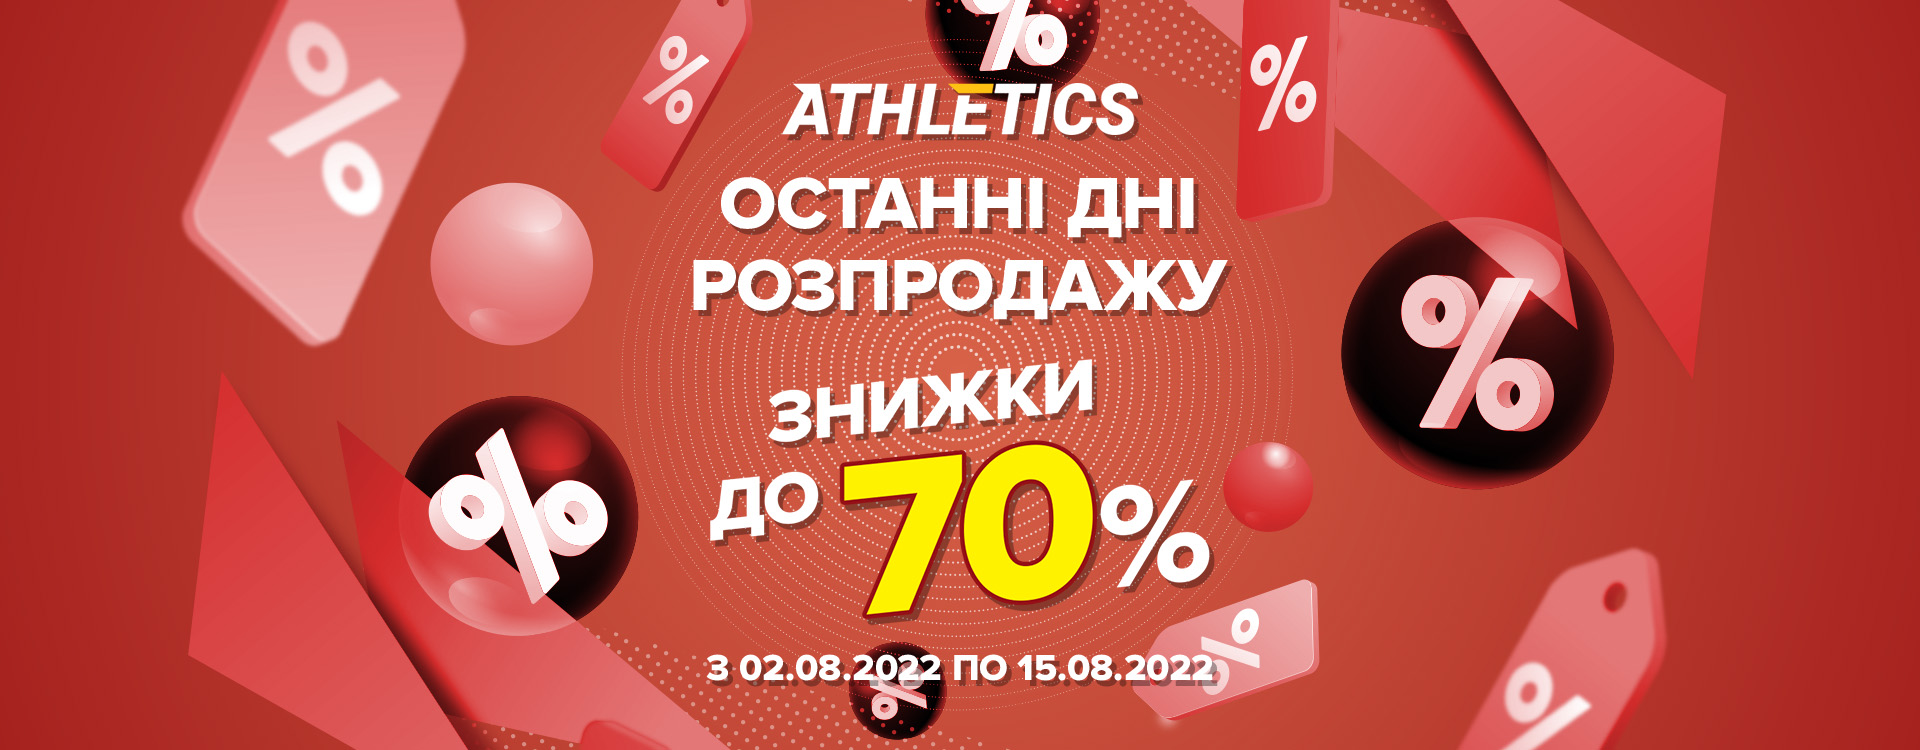 Discounts on goods up to -70% in ATHLETICS